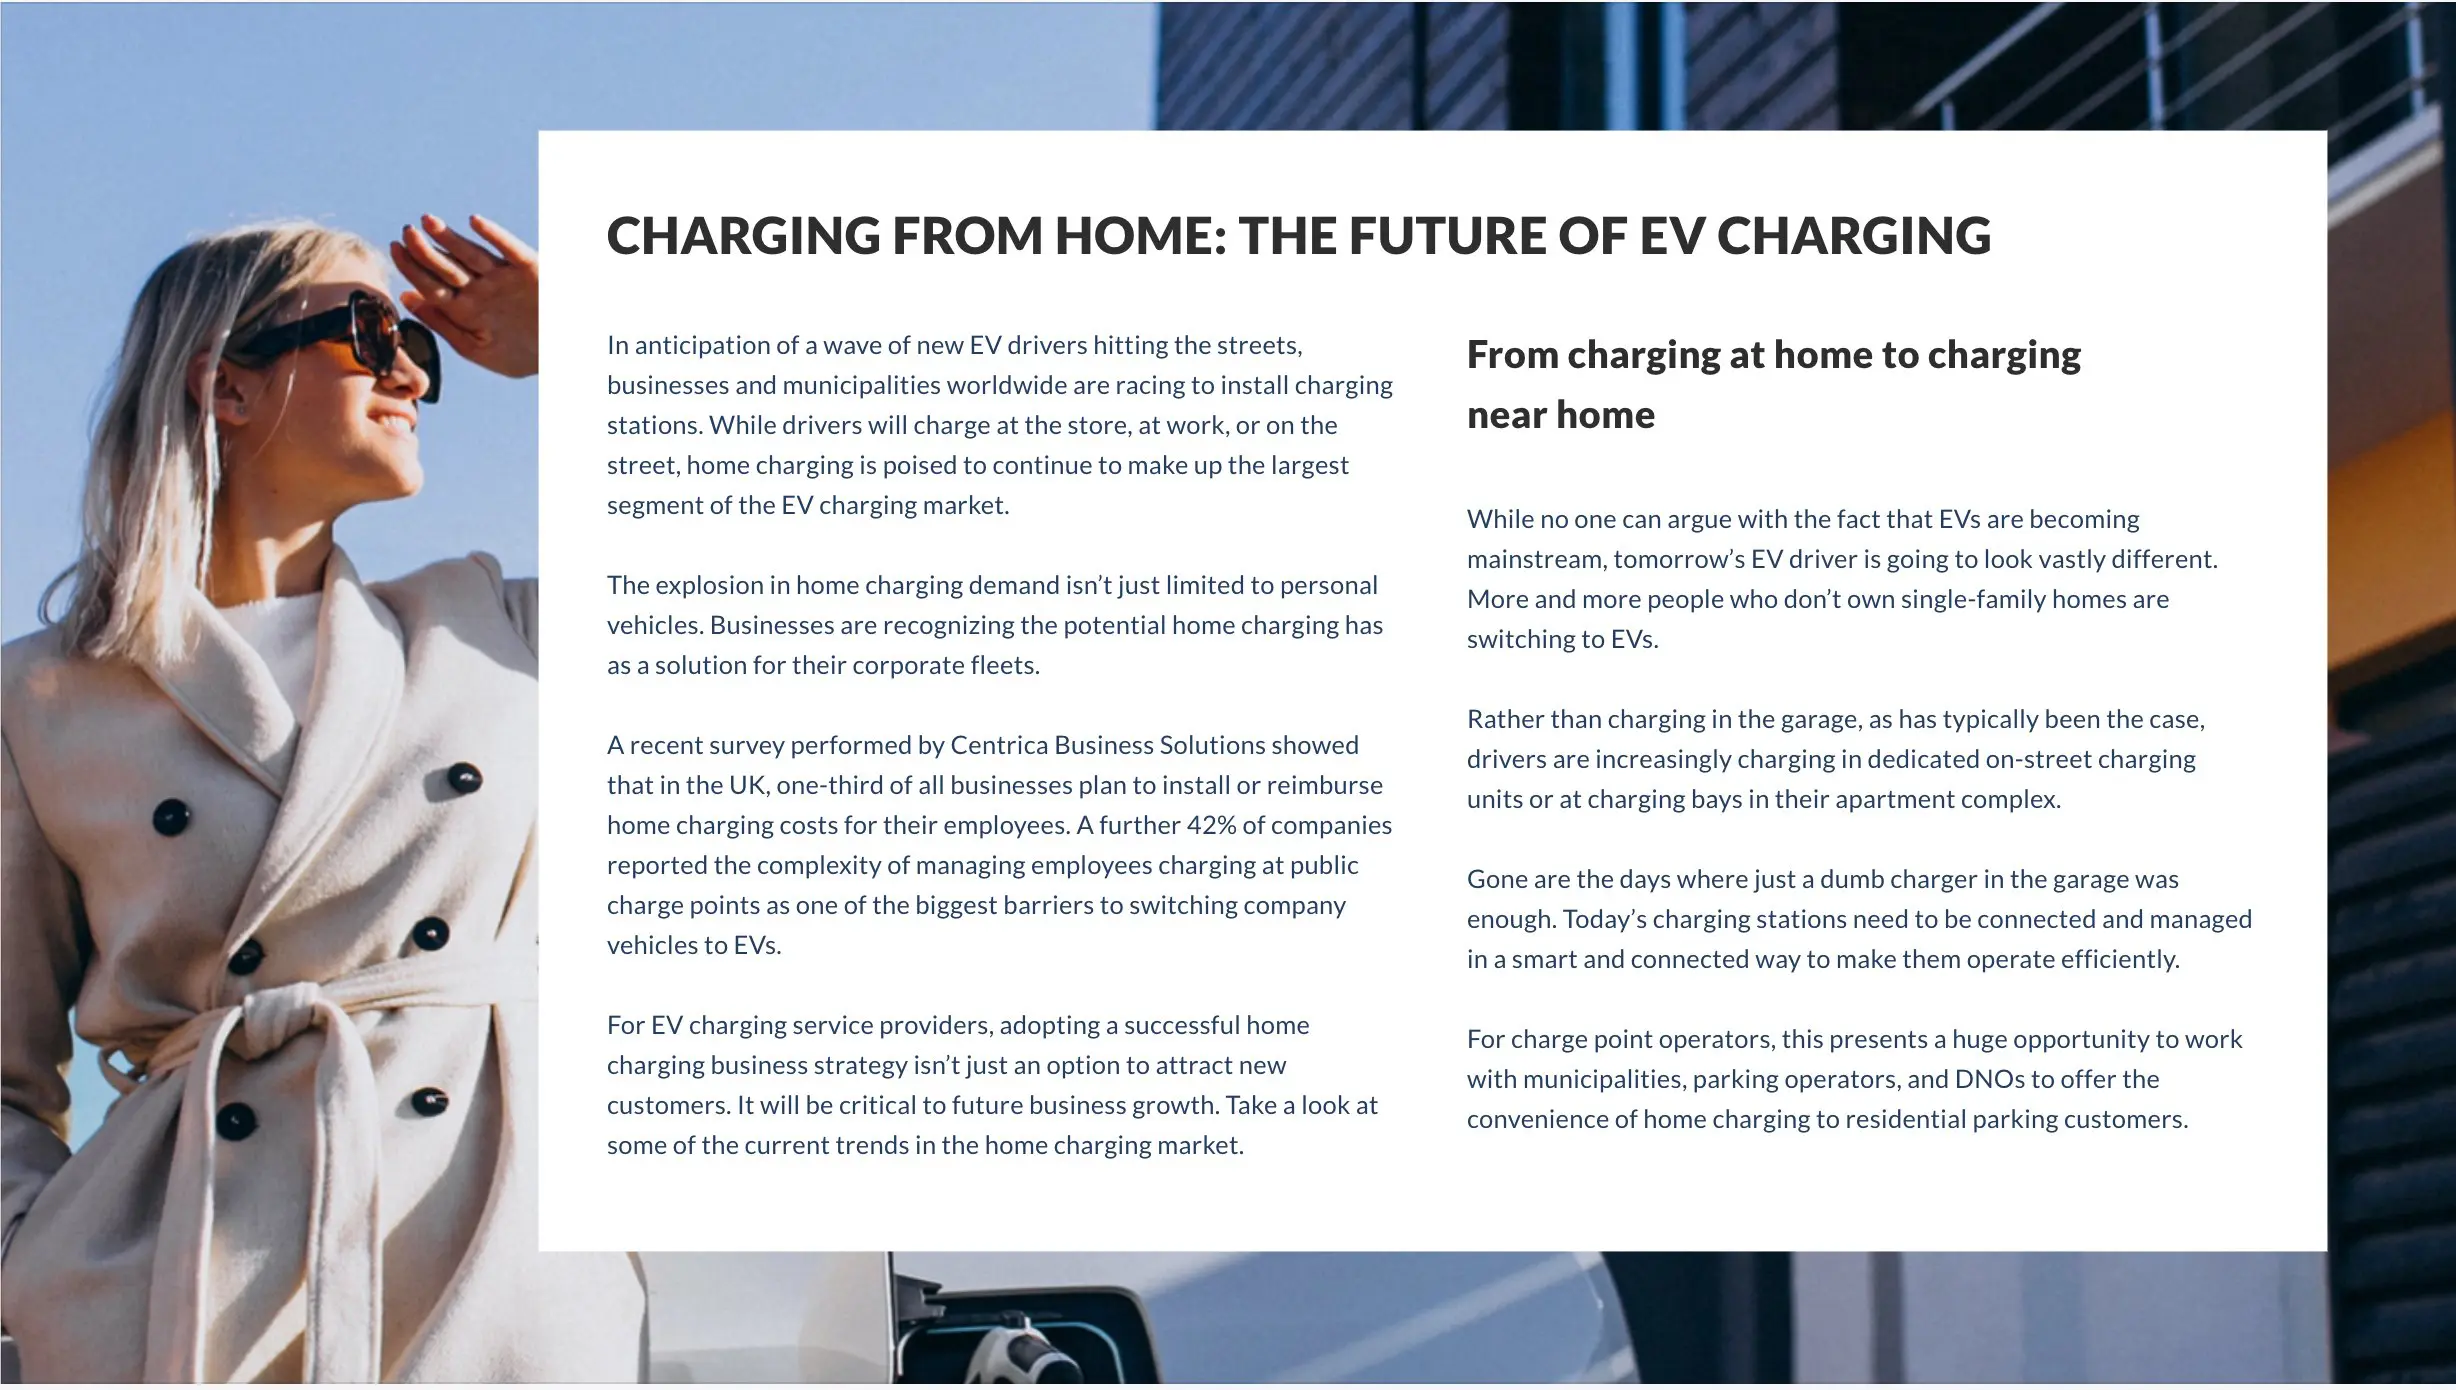 Building A Successful Home Charging Business Model - For a full guide to the home charging market, establishing your home charging business model, and key tools for success, click here to download our e-book.